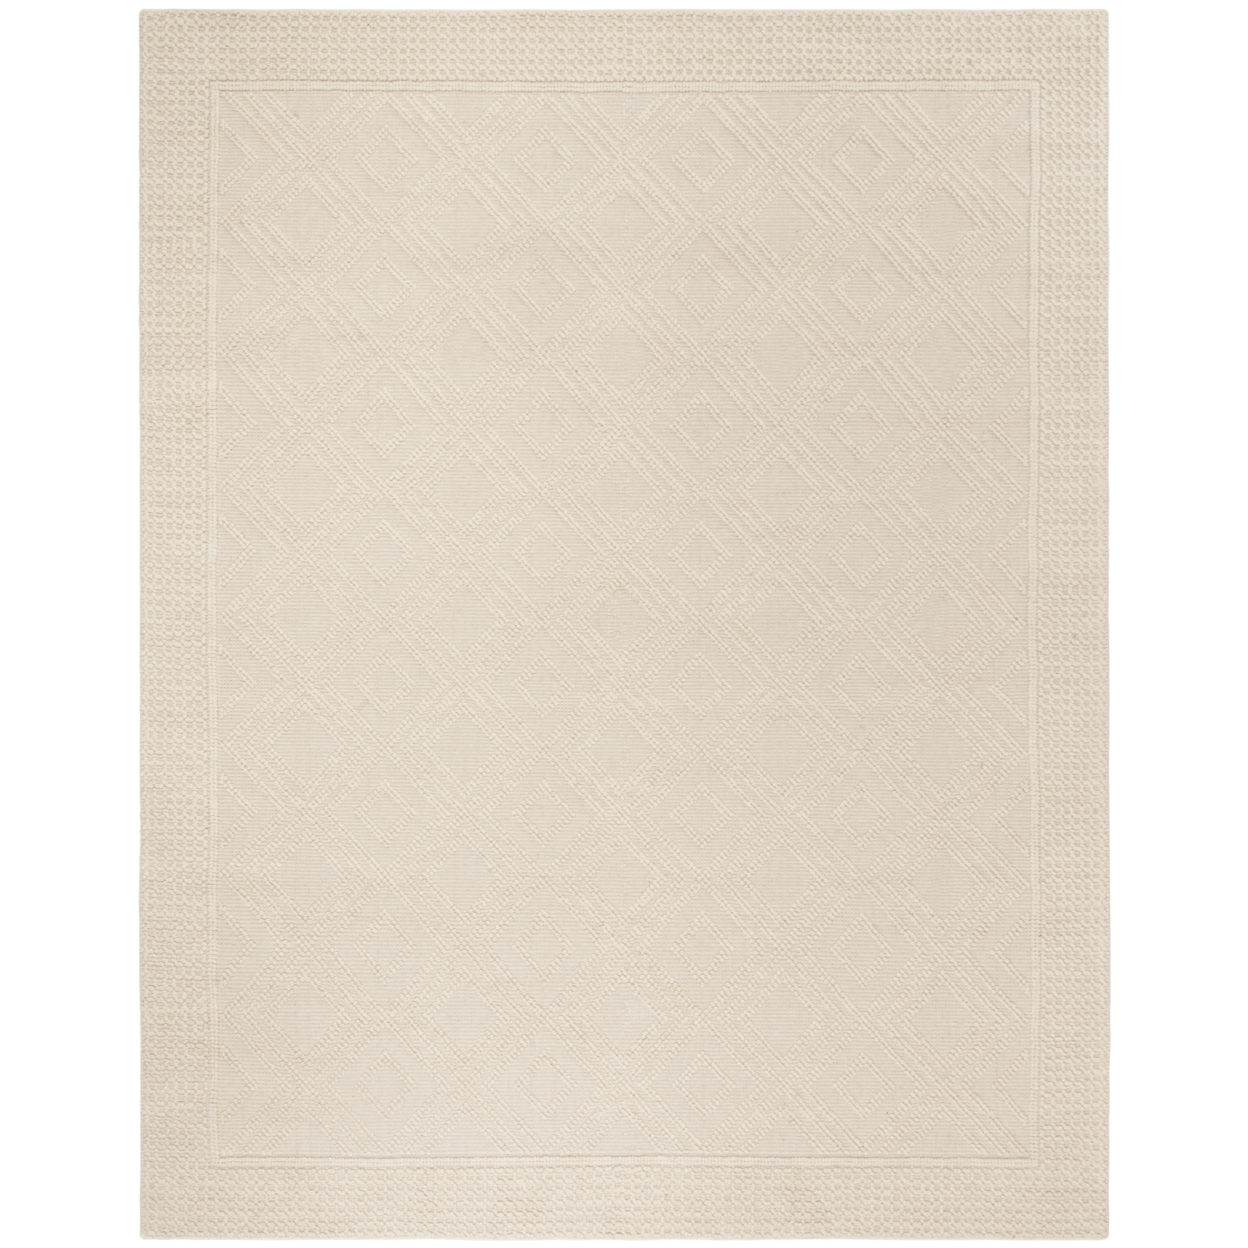 SAFAVIEH Vermont Collection VRM212A Handwoven Ivory Rug - 8 X 10